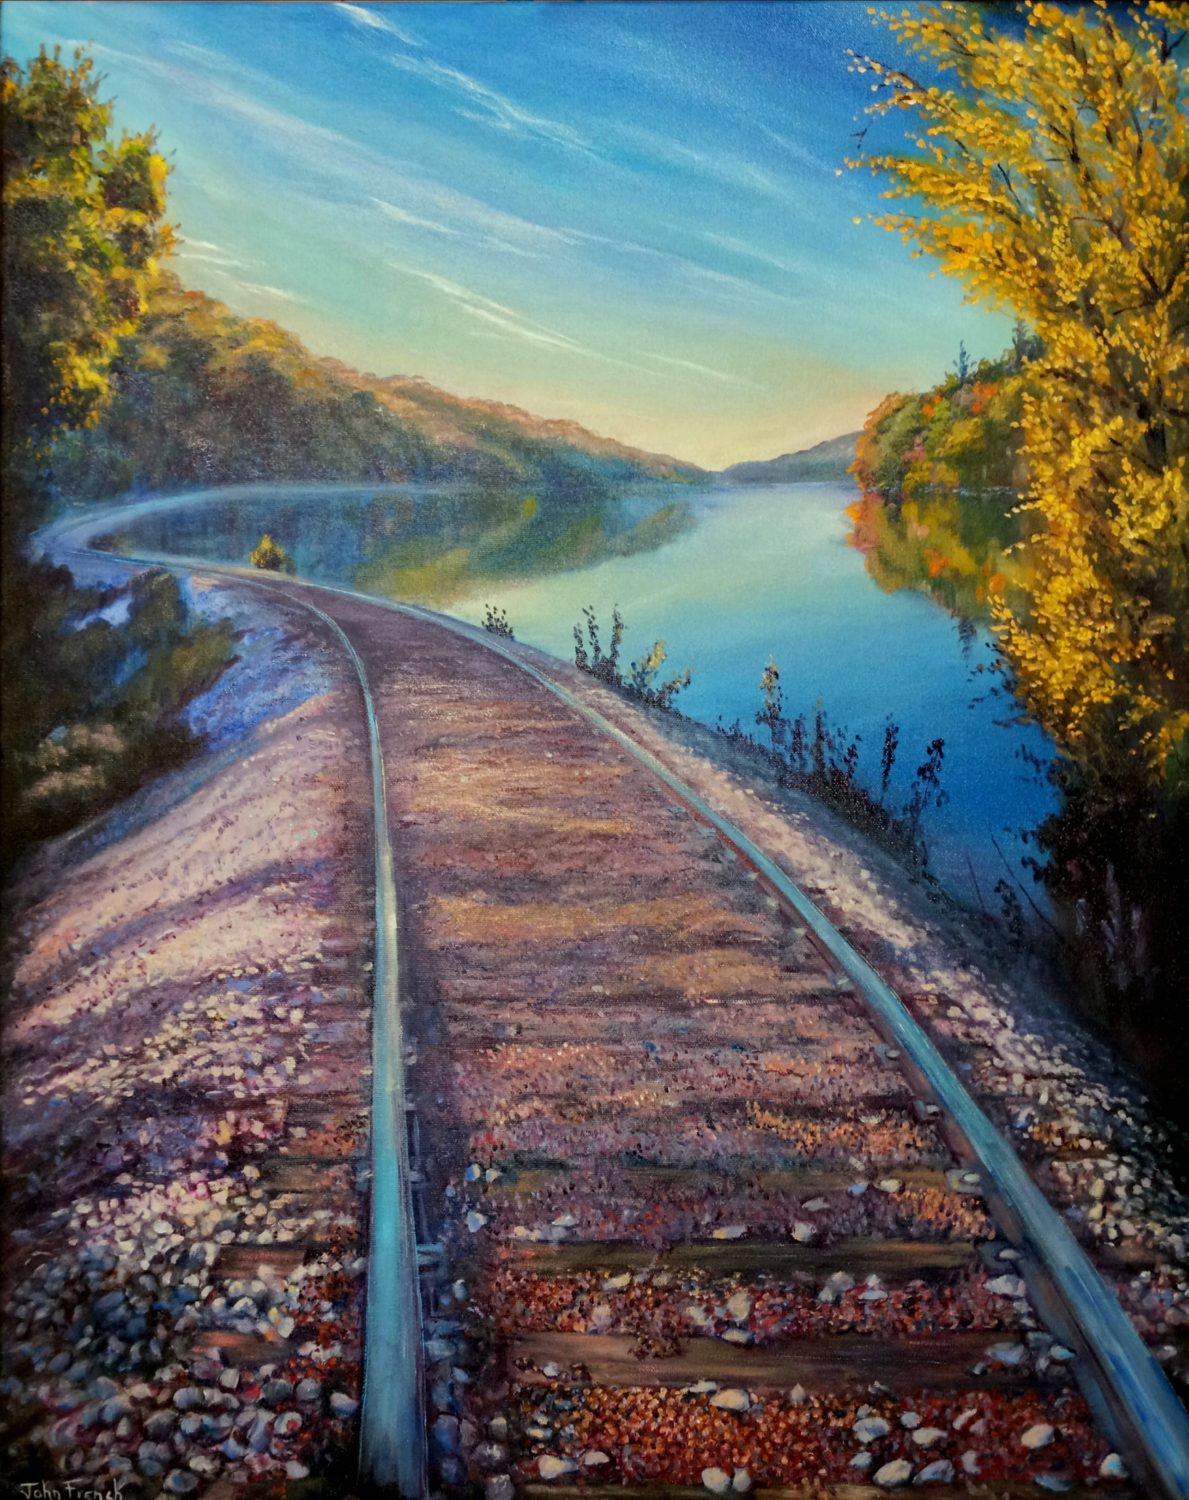 landscape painting of train track running along a lake